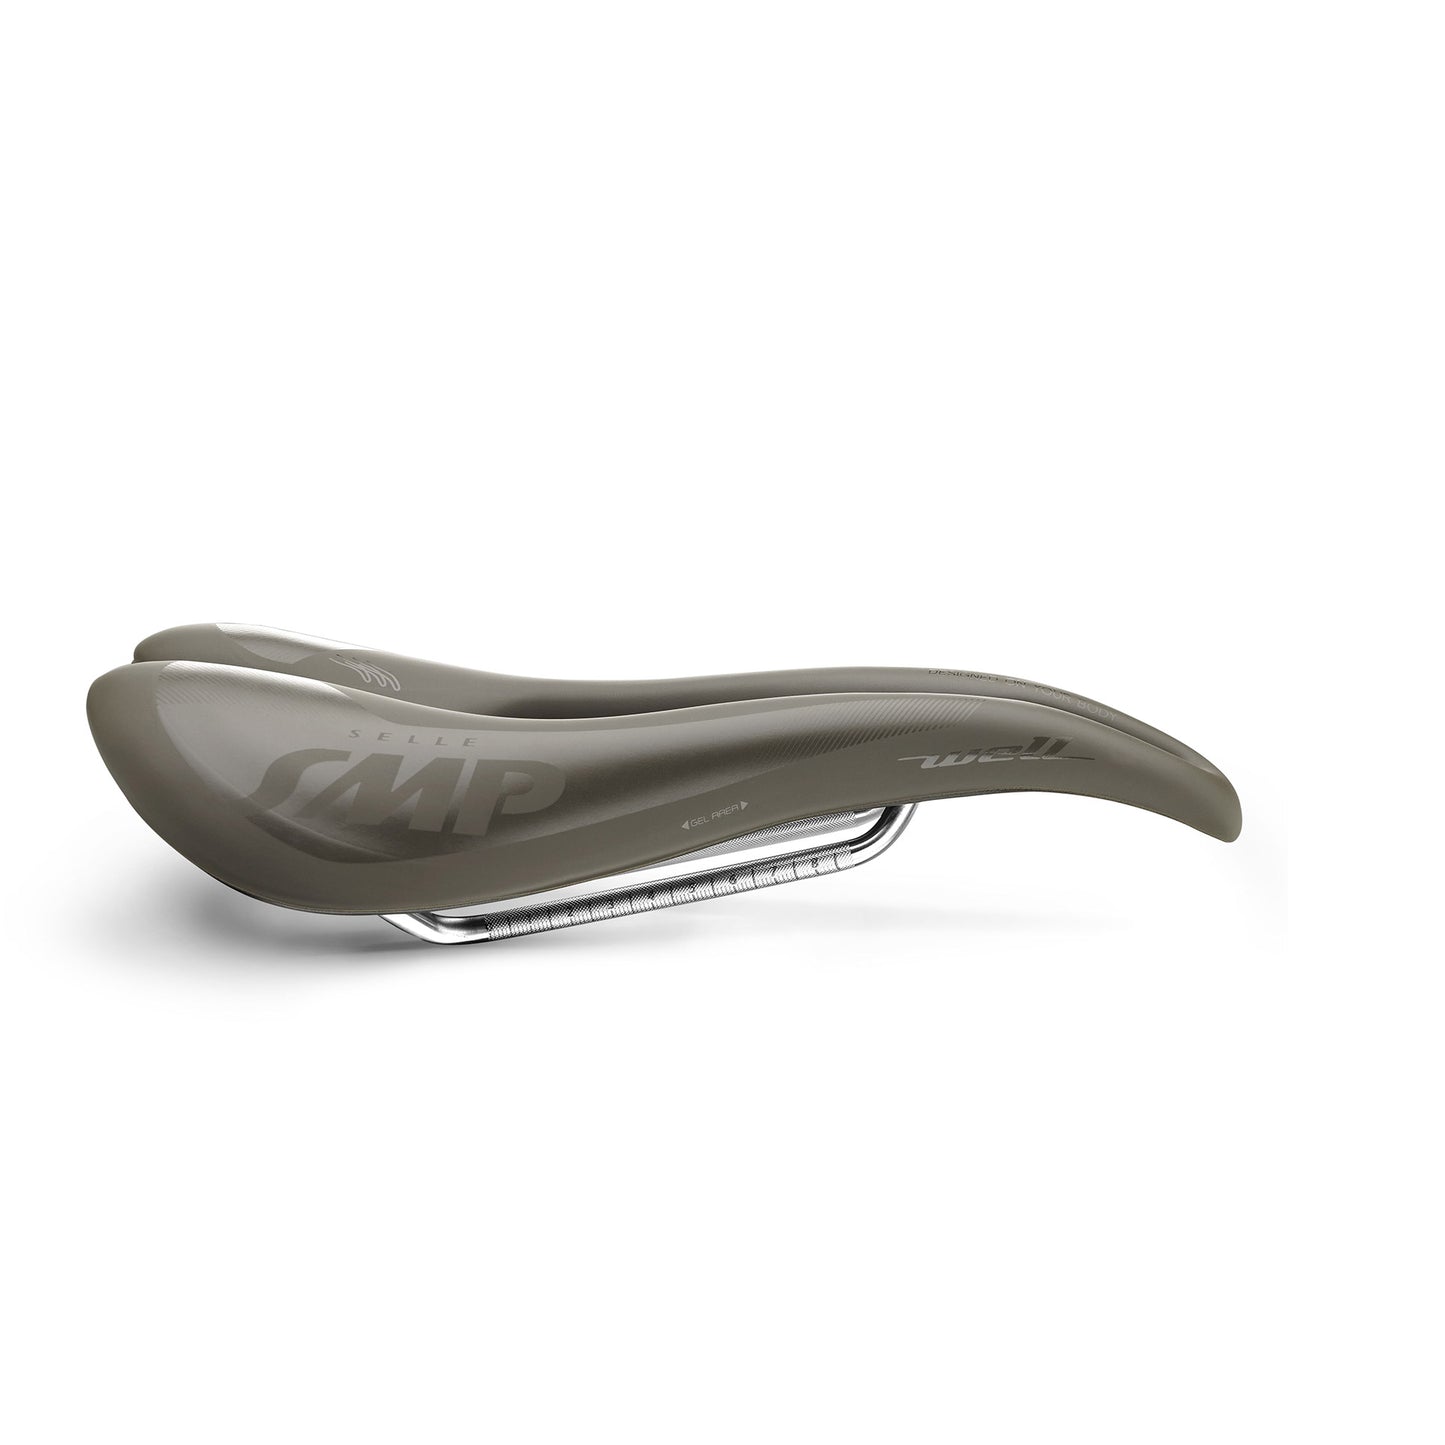 Selle SMP Zadel Tour Well gel gravel edition